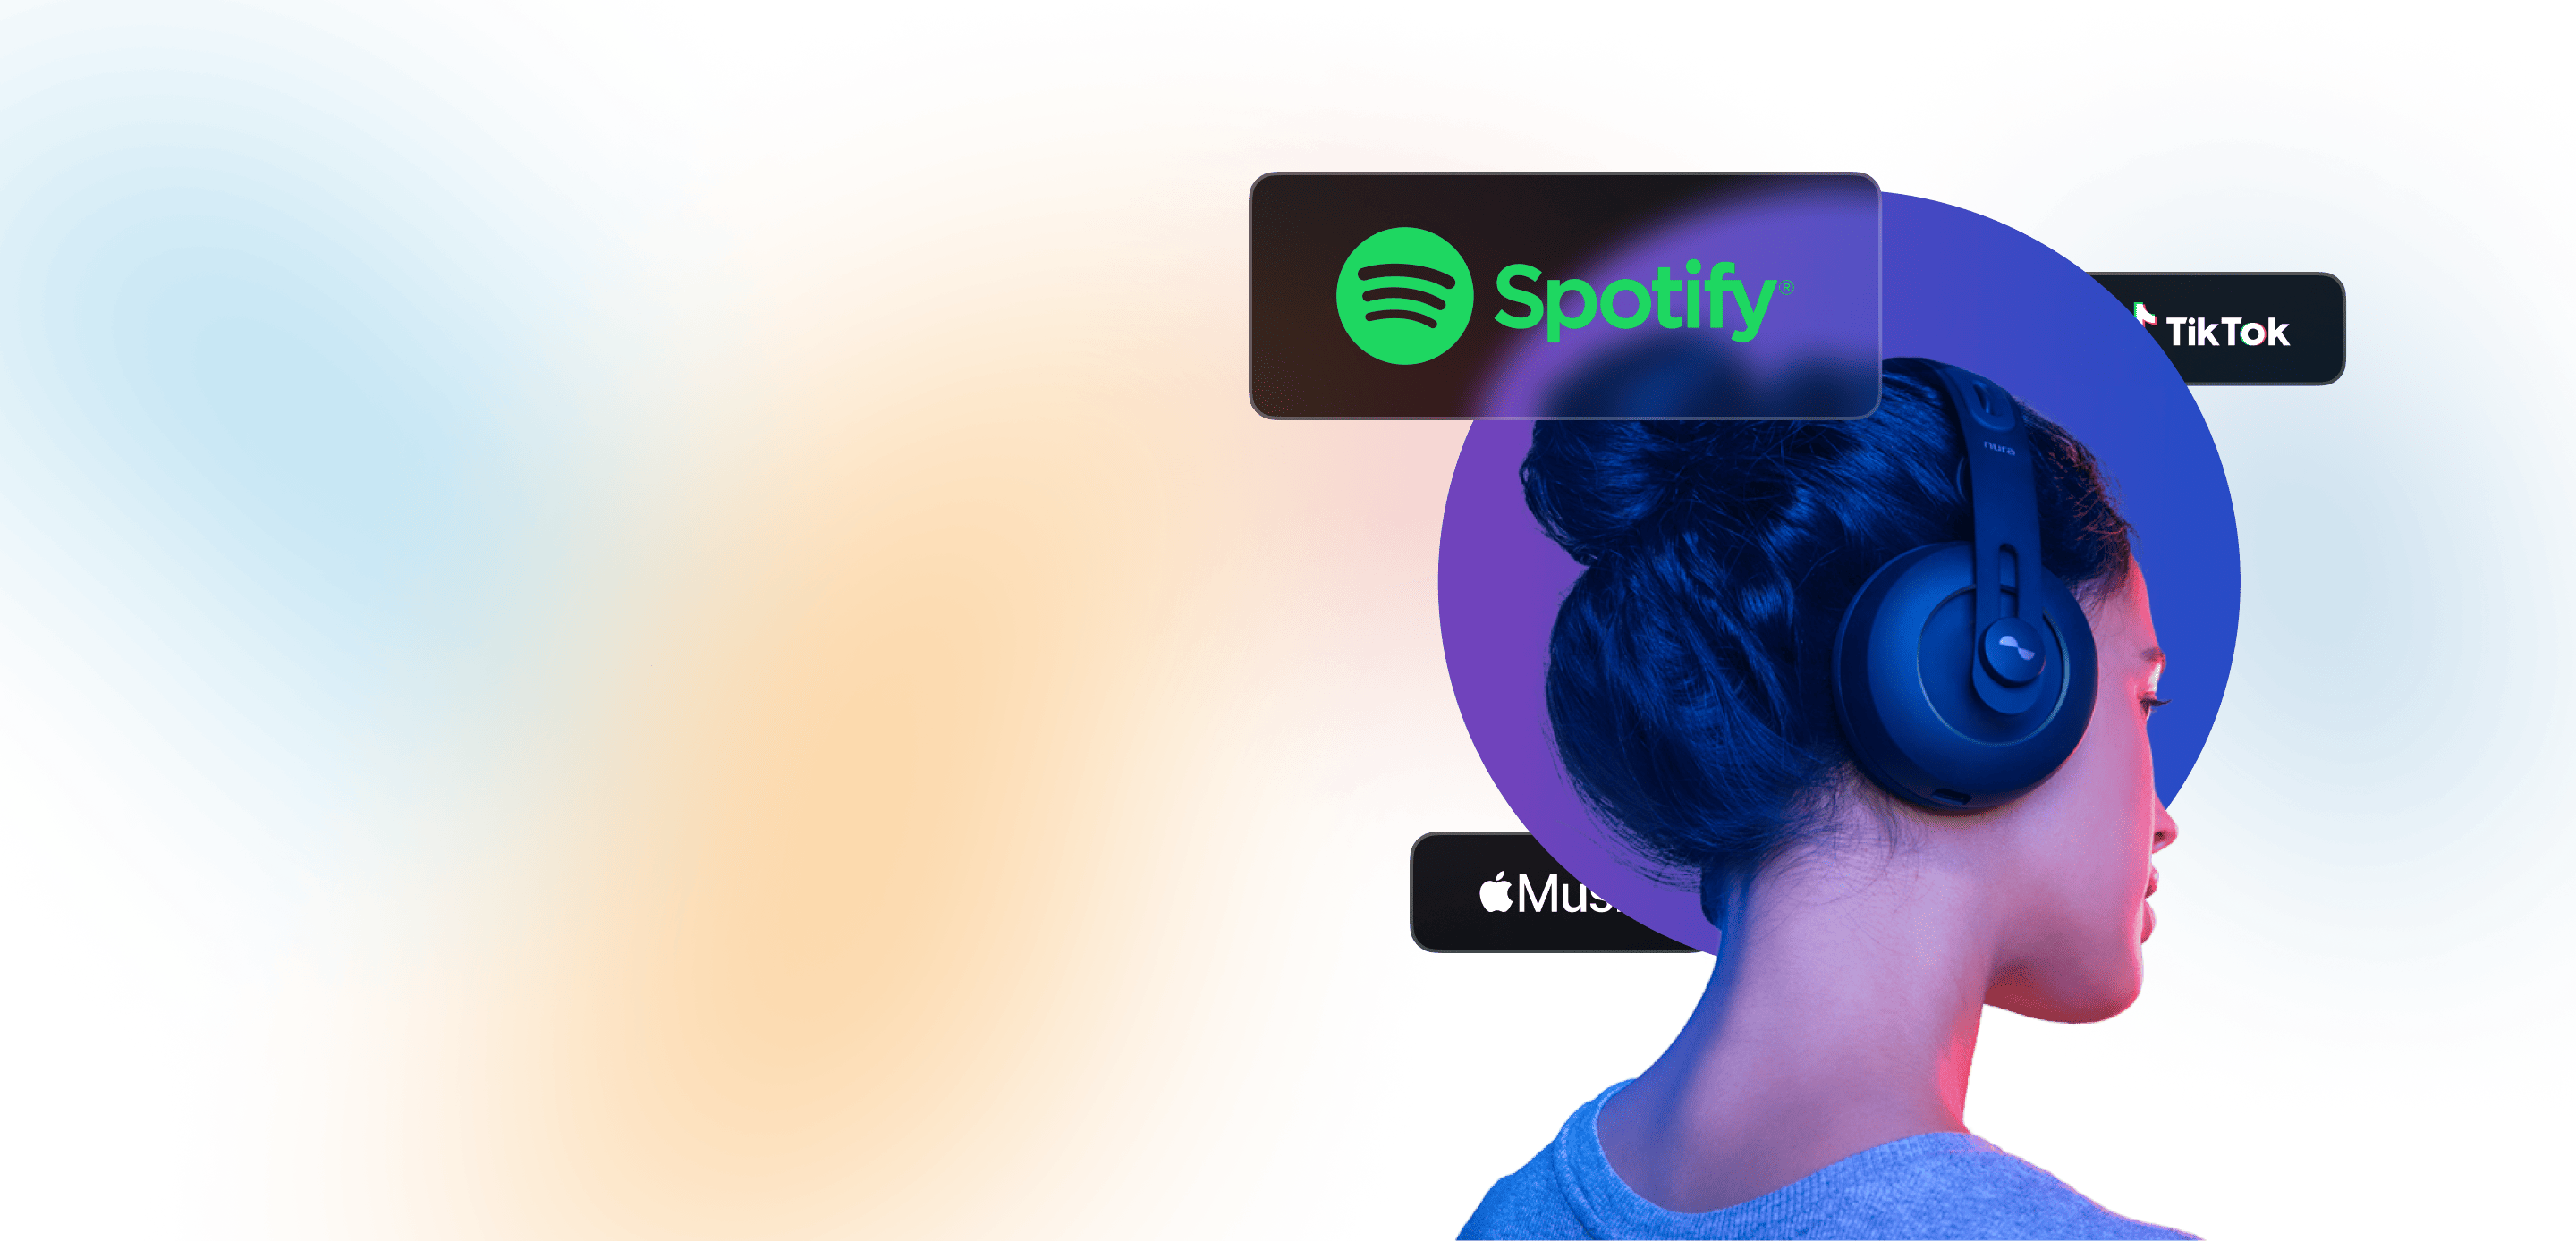 RELEASE YOUR MUSIC ON SPOTIFY